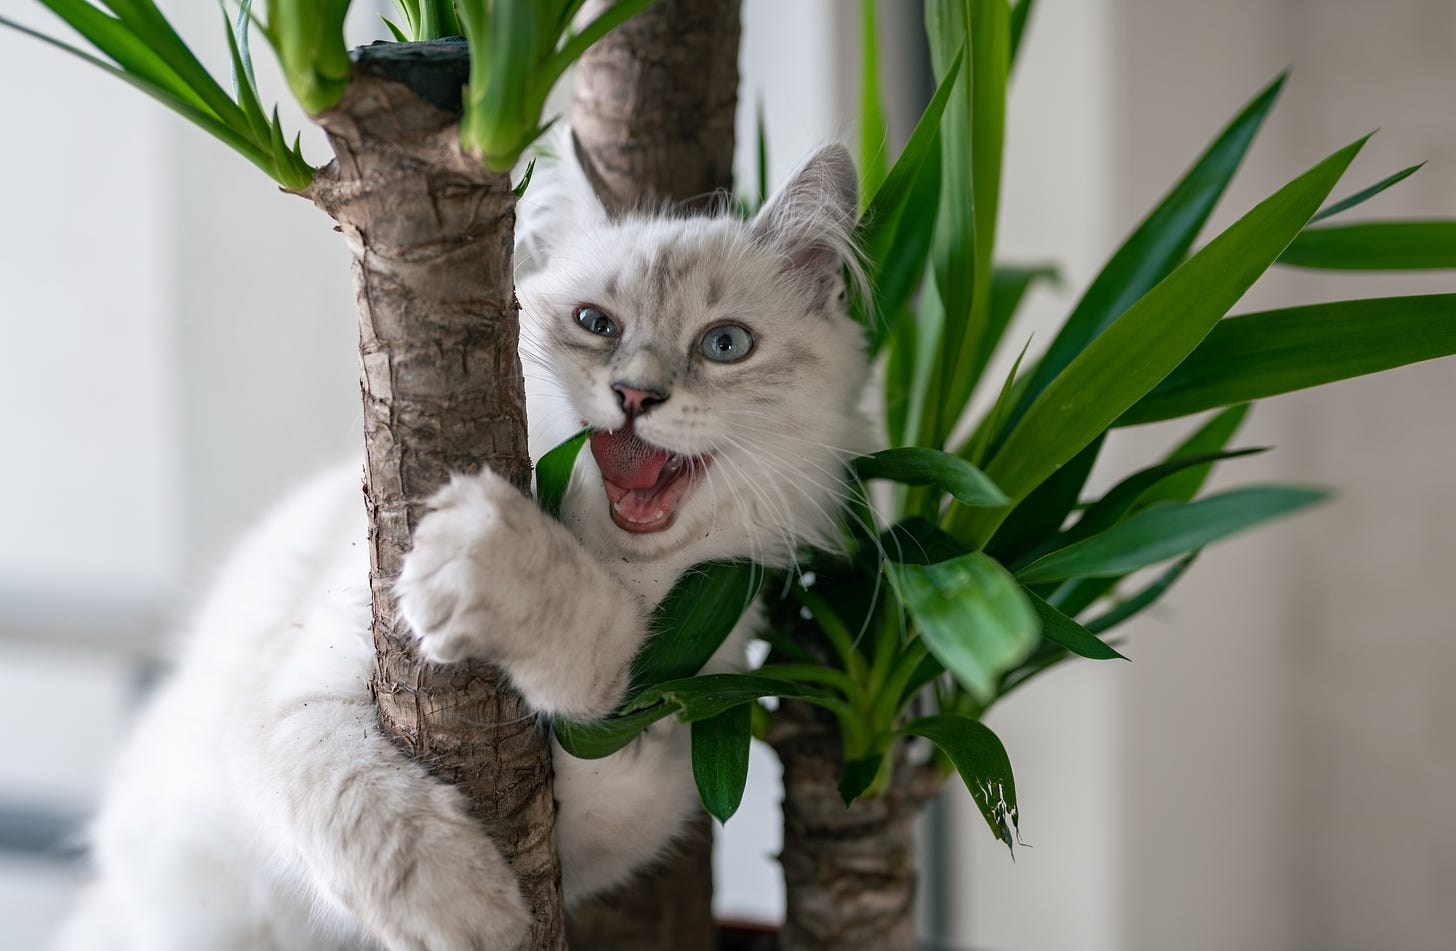 A white cat with a bit of grey in its fur clinging to a plant branch, mouth open and looking happy as if saying "Heyyyy!"